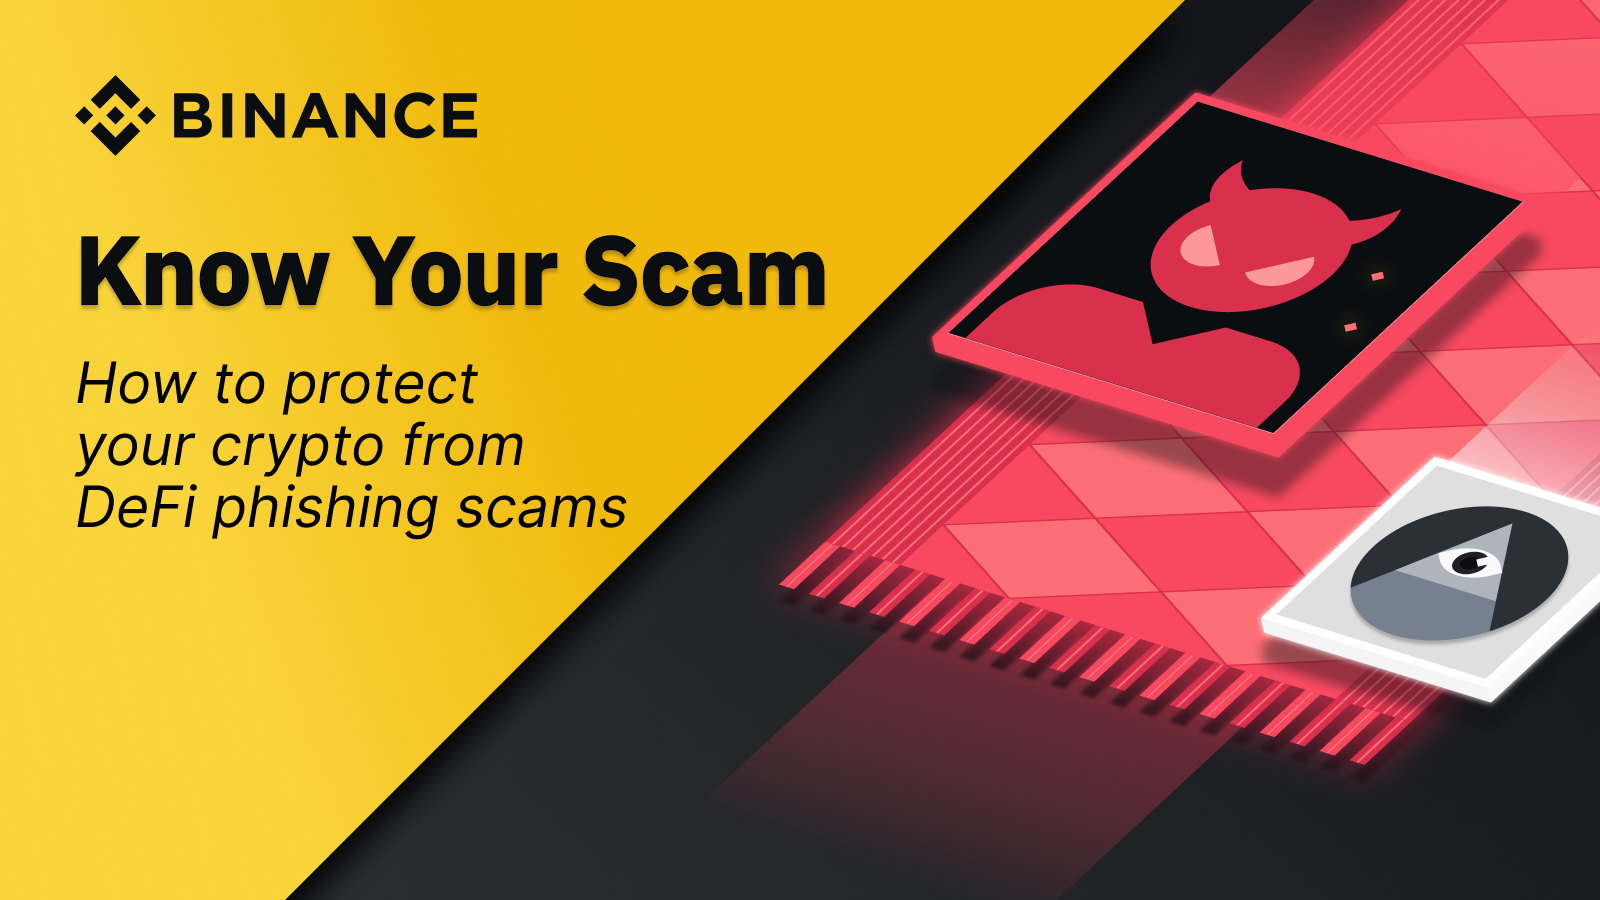 6. Stay updated on the latest scams